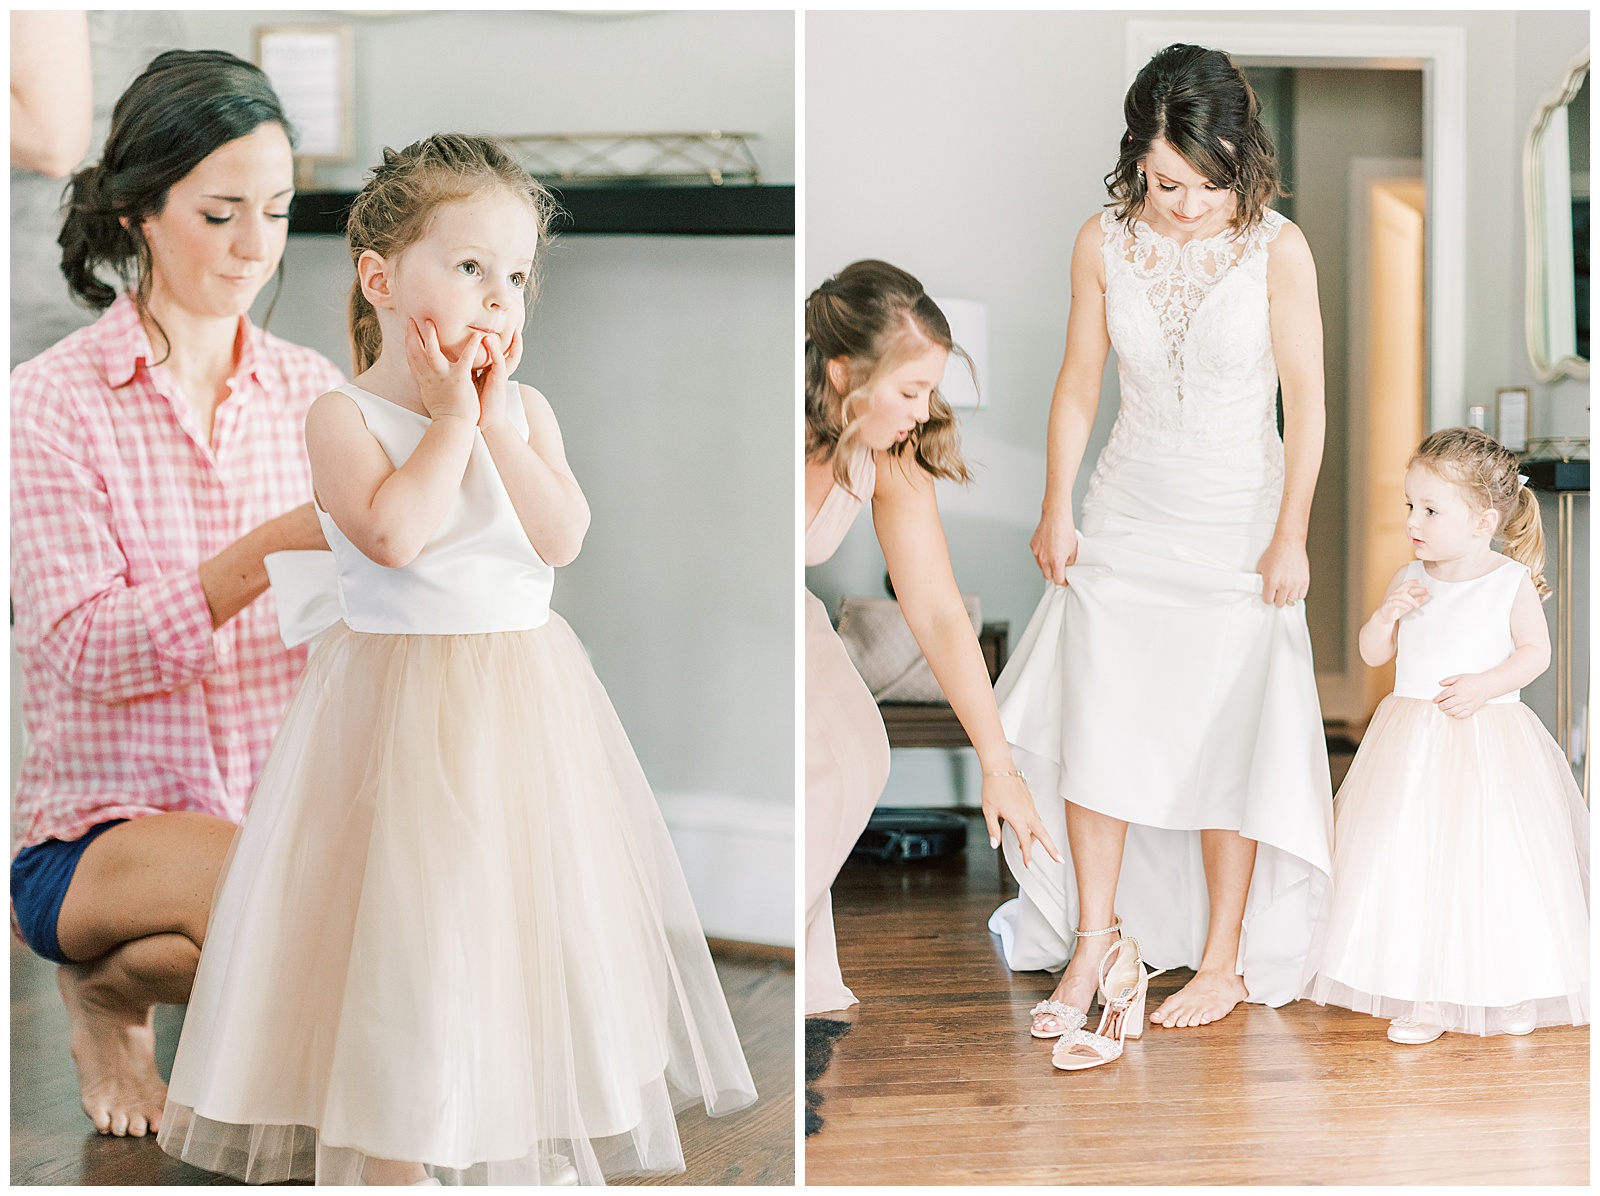 bride getting ready in lace wedding dress with flower girl in pink dress